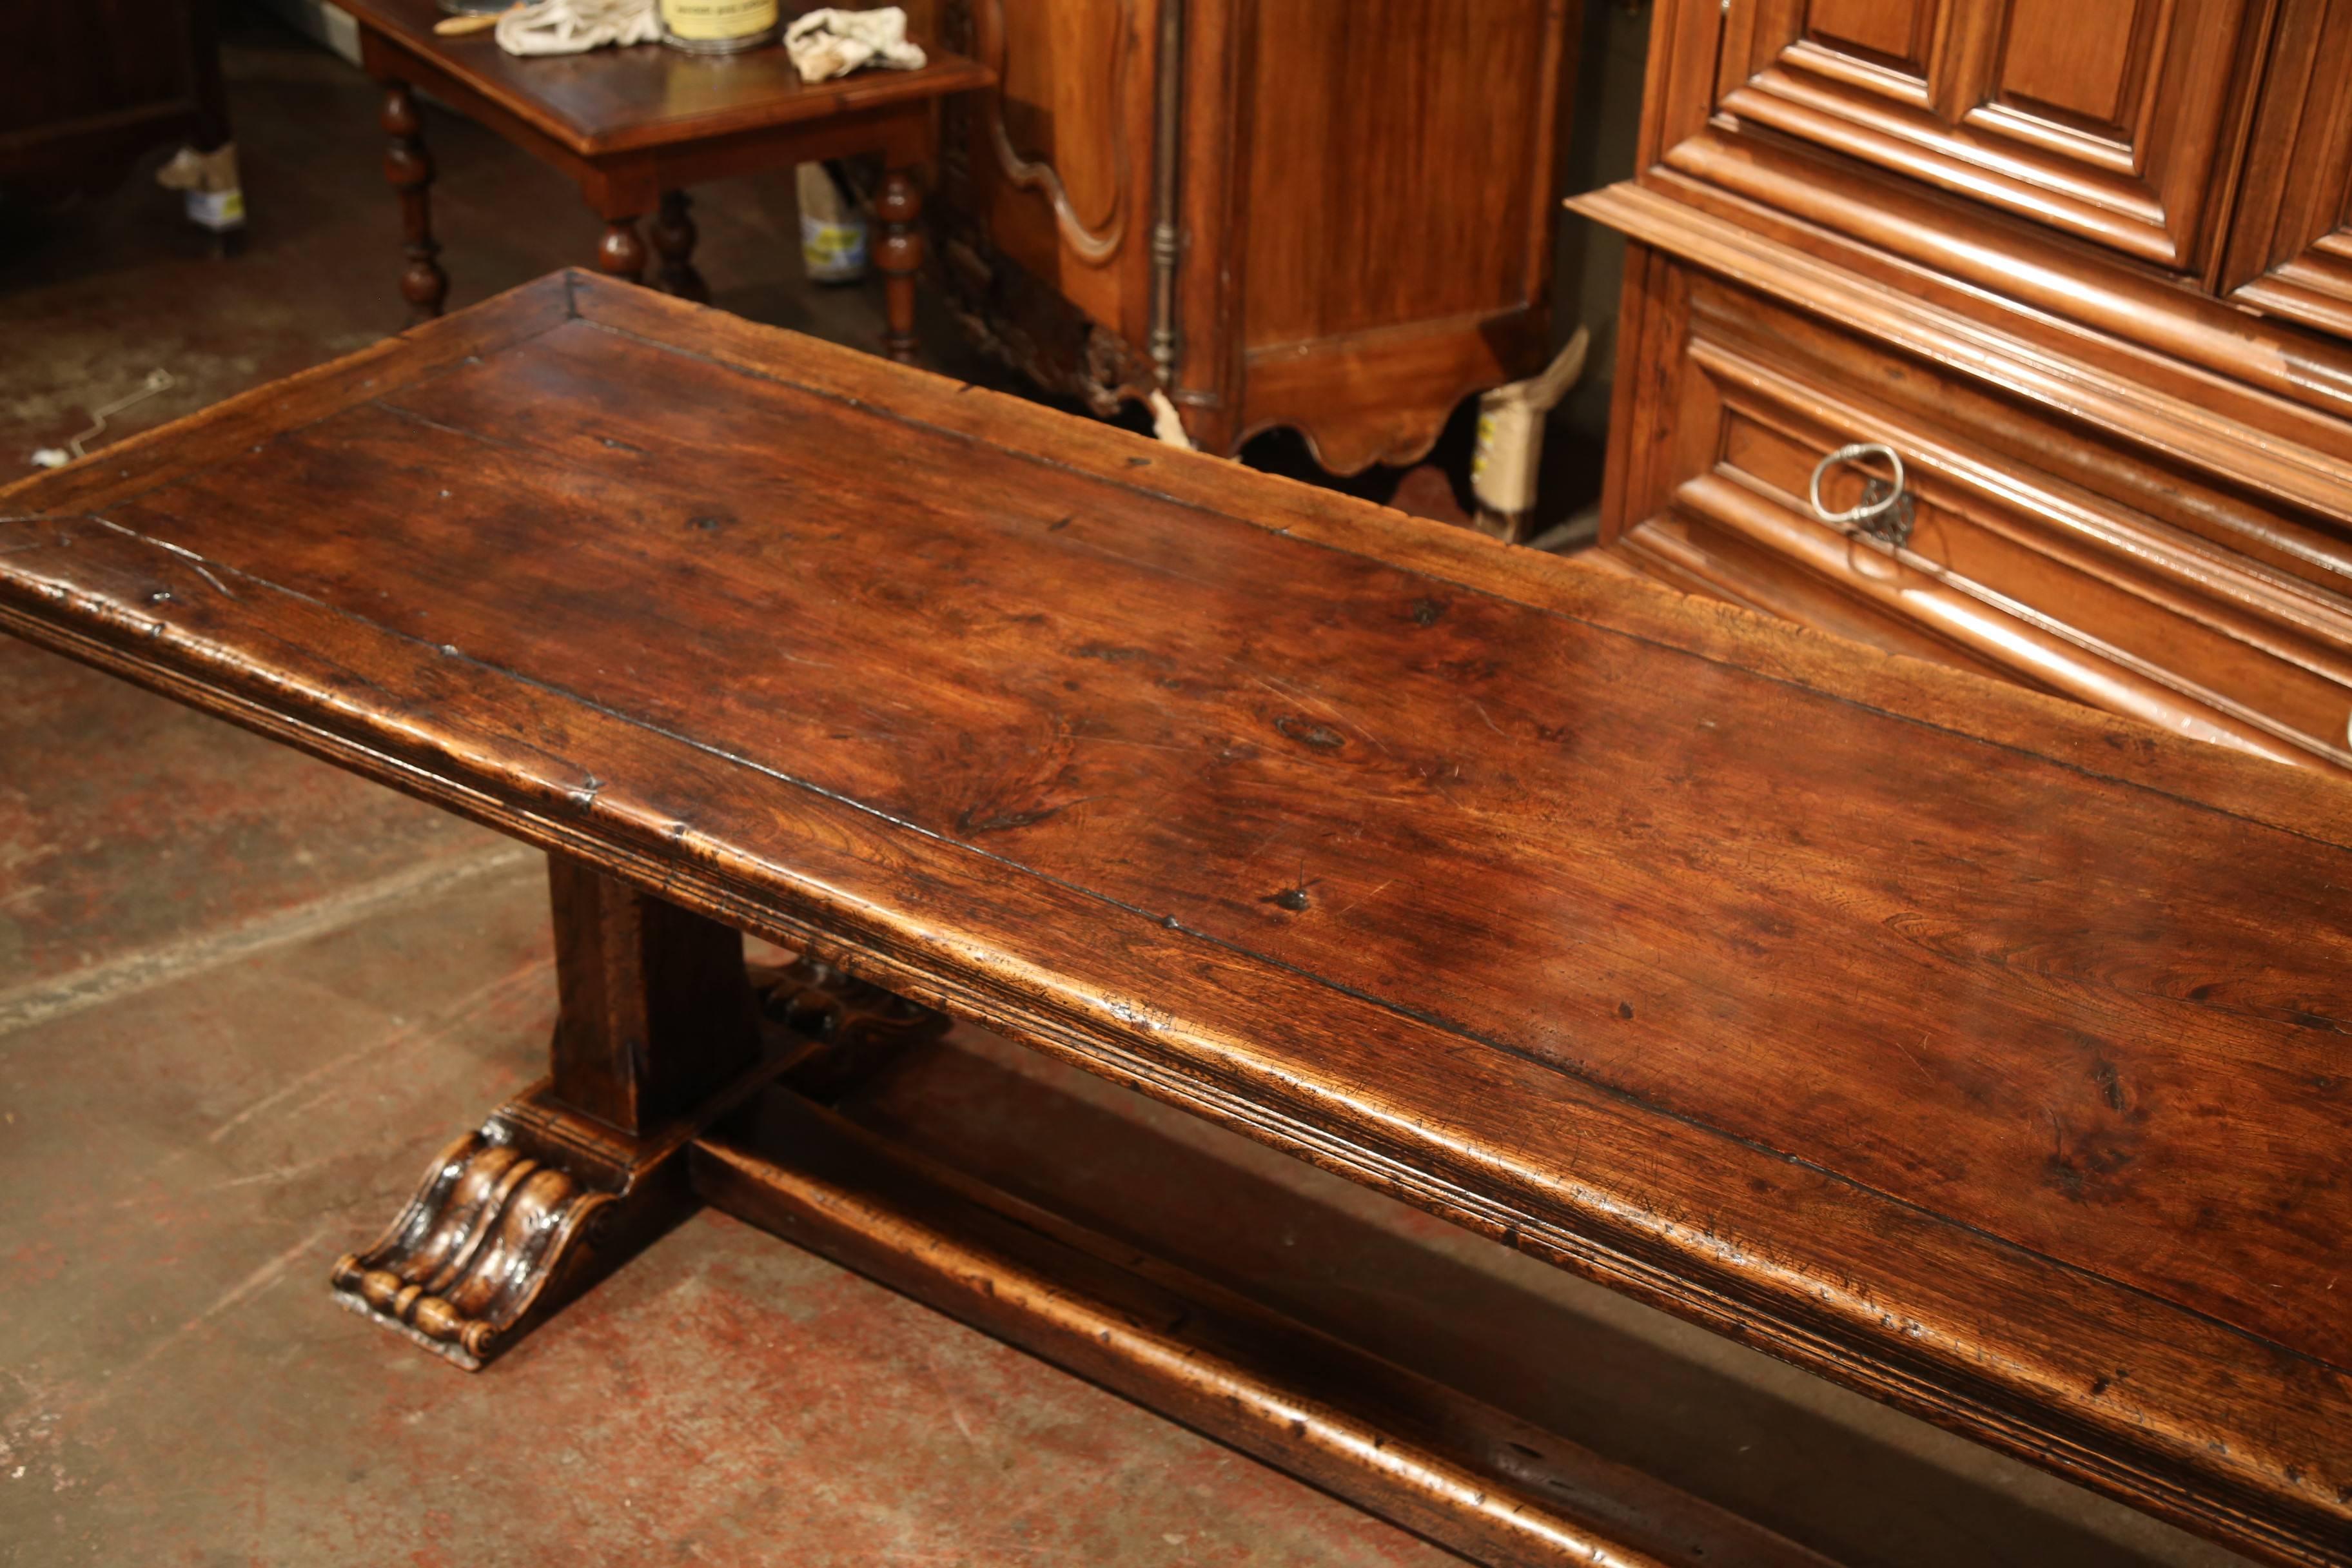 This large fruitwood dining room table was crafted in southwest France, near the Spanish and French border. The long tabletop features a walnut frame work around the center single plank surface, and embellished with carved edges around the